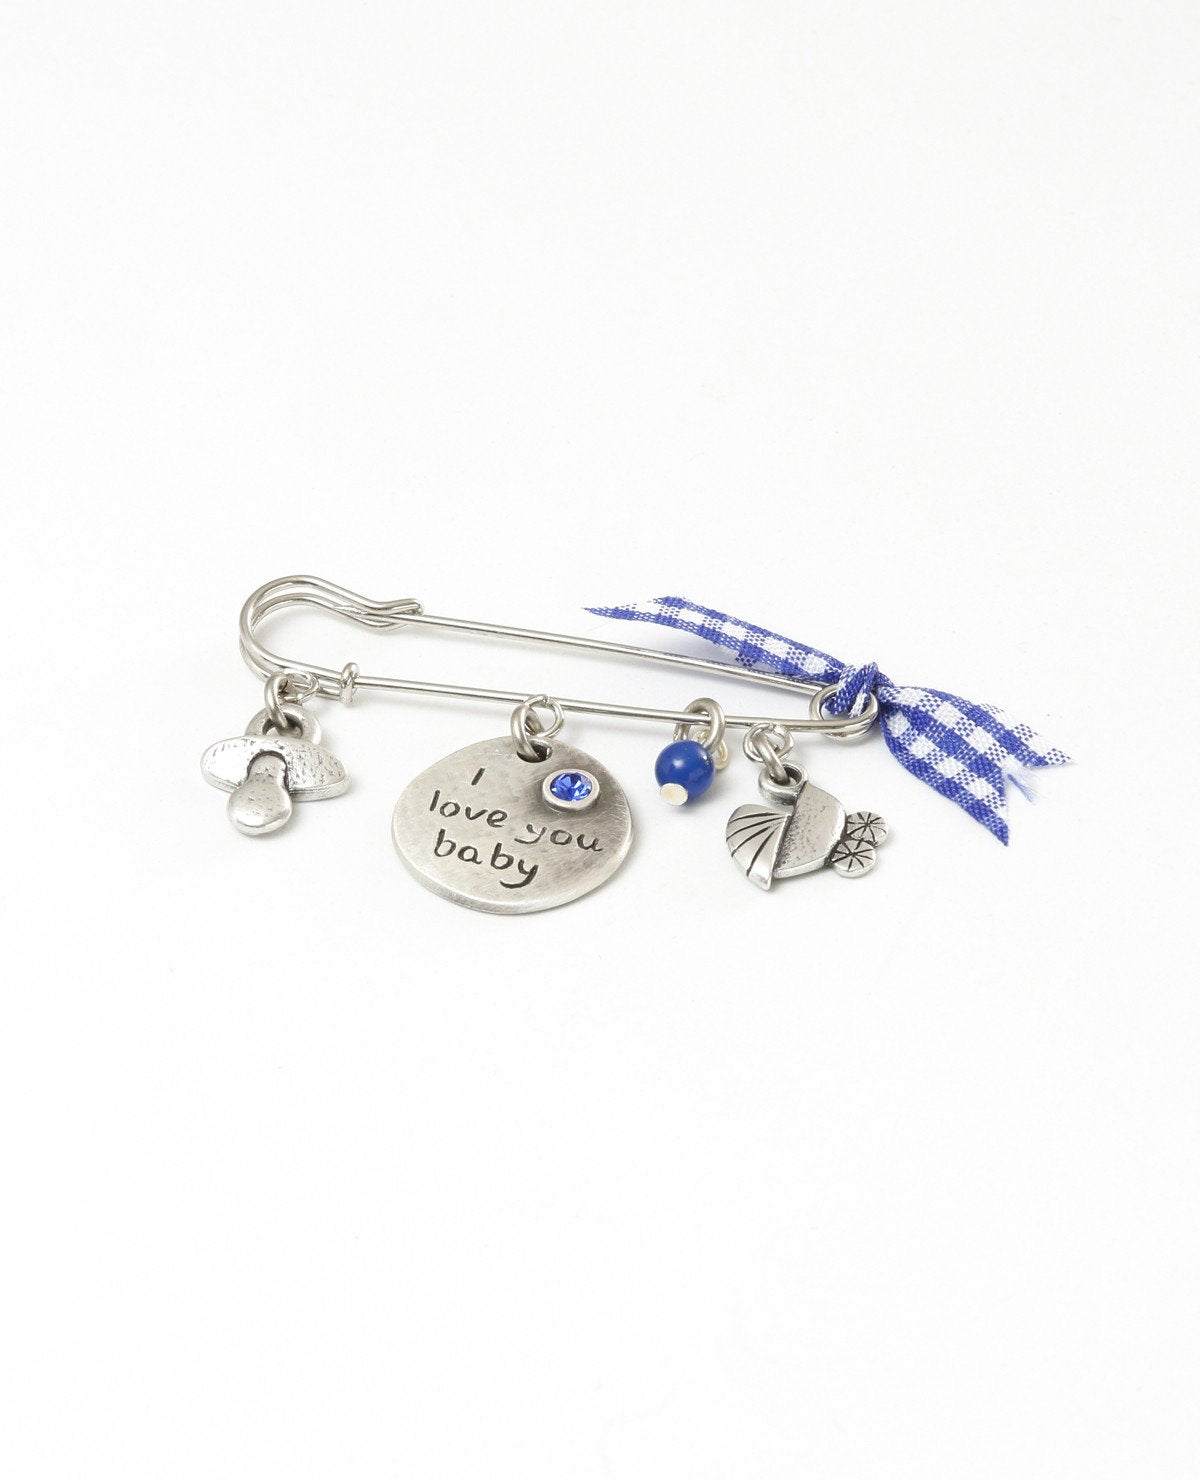 Baby Boy pin with cute elements, sterling silver plated.  Length: 4 cm  Width: 5 cm